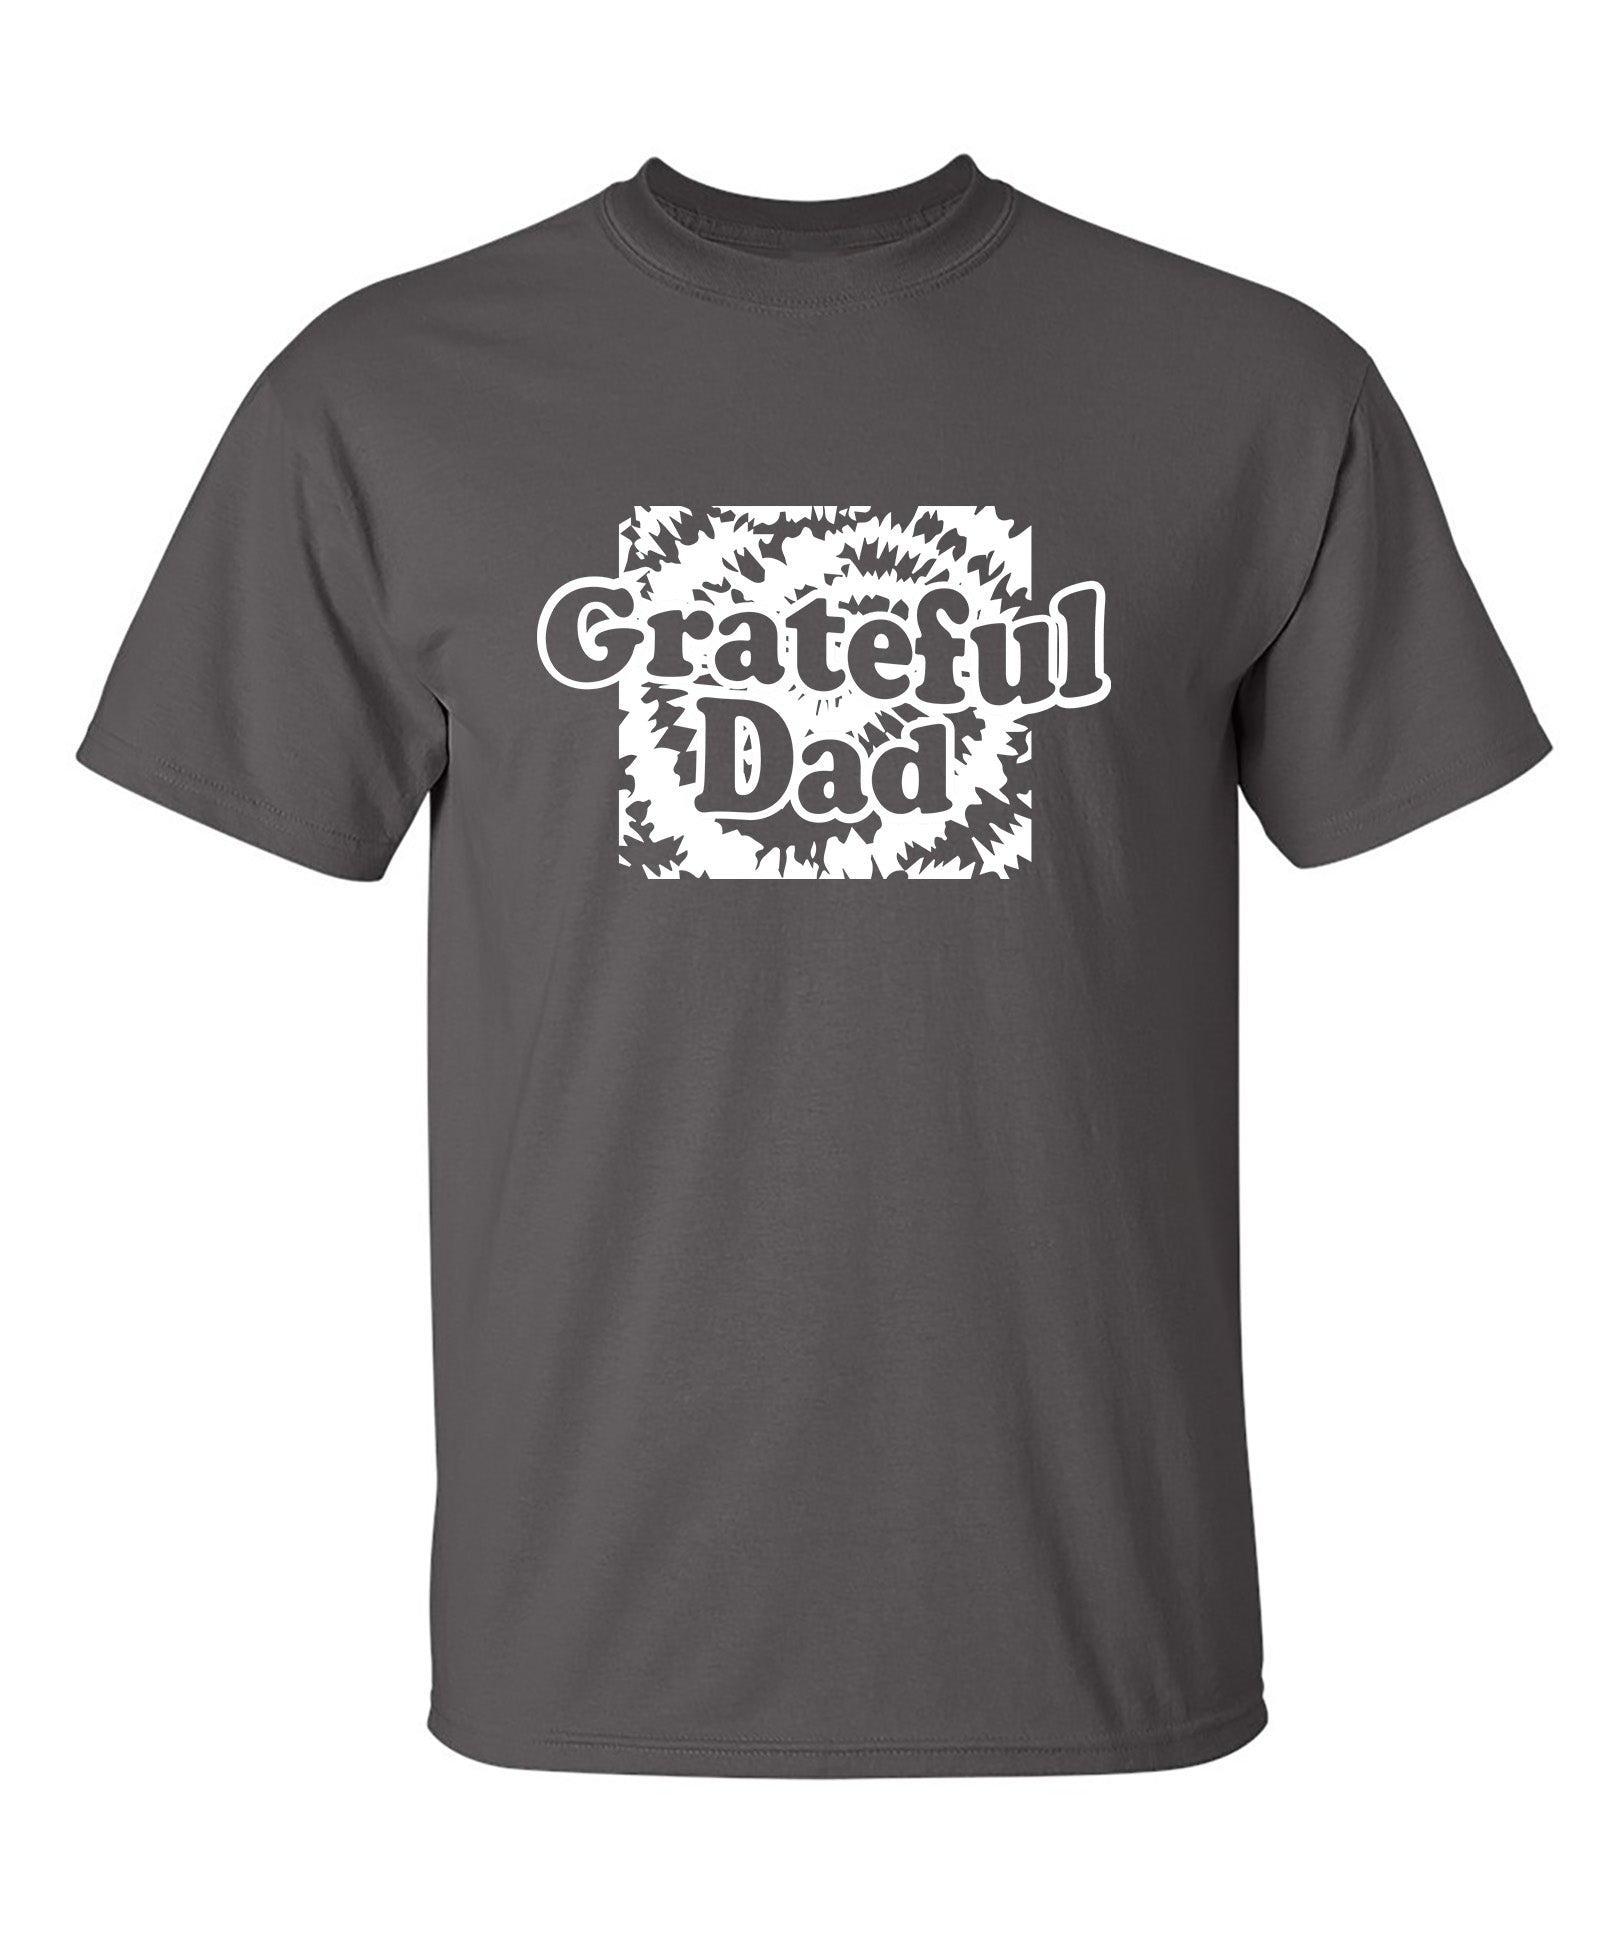 Greatful Dad - Funny T Shirts & Graphic Tees